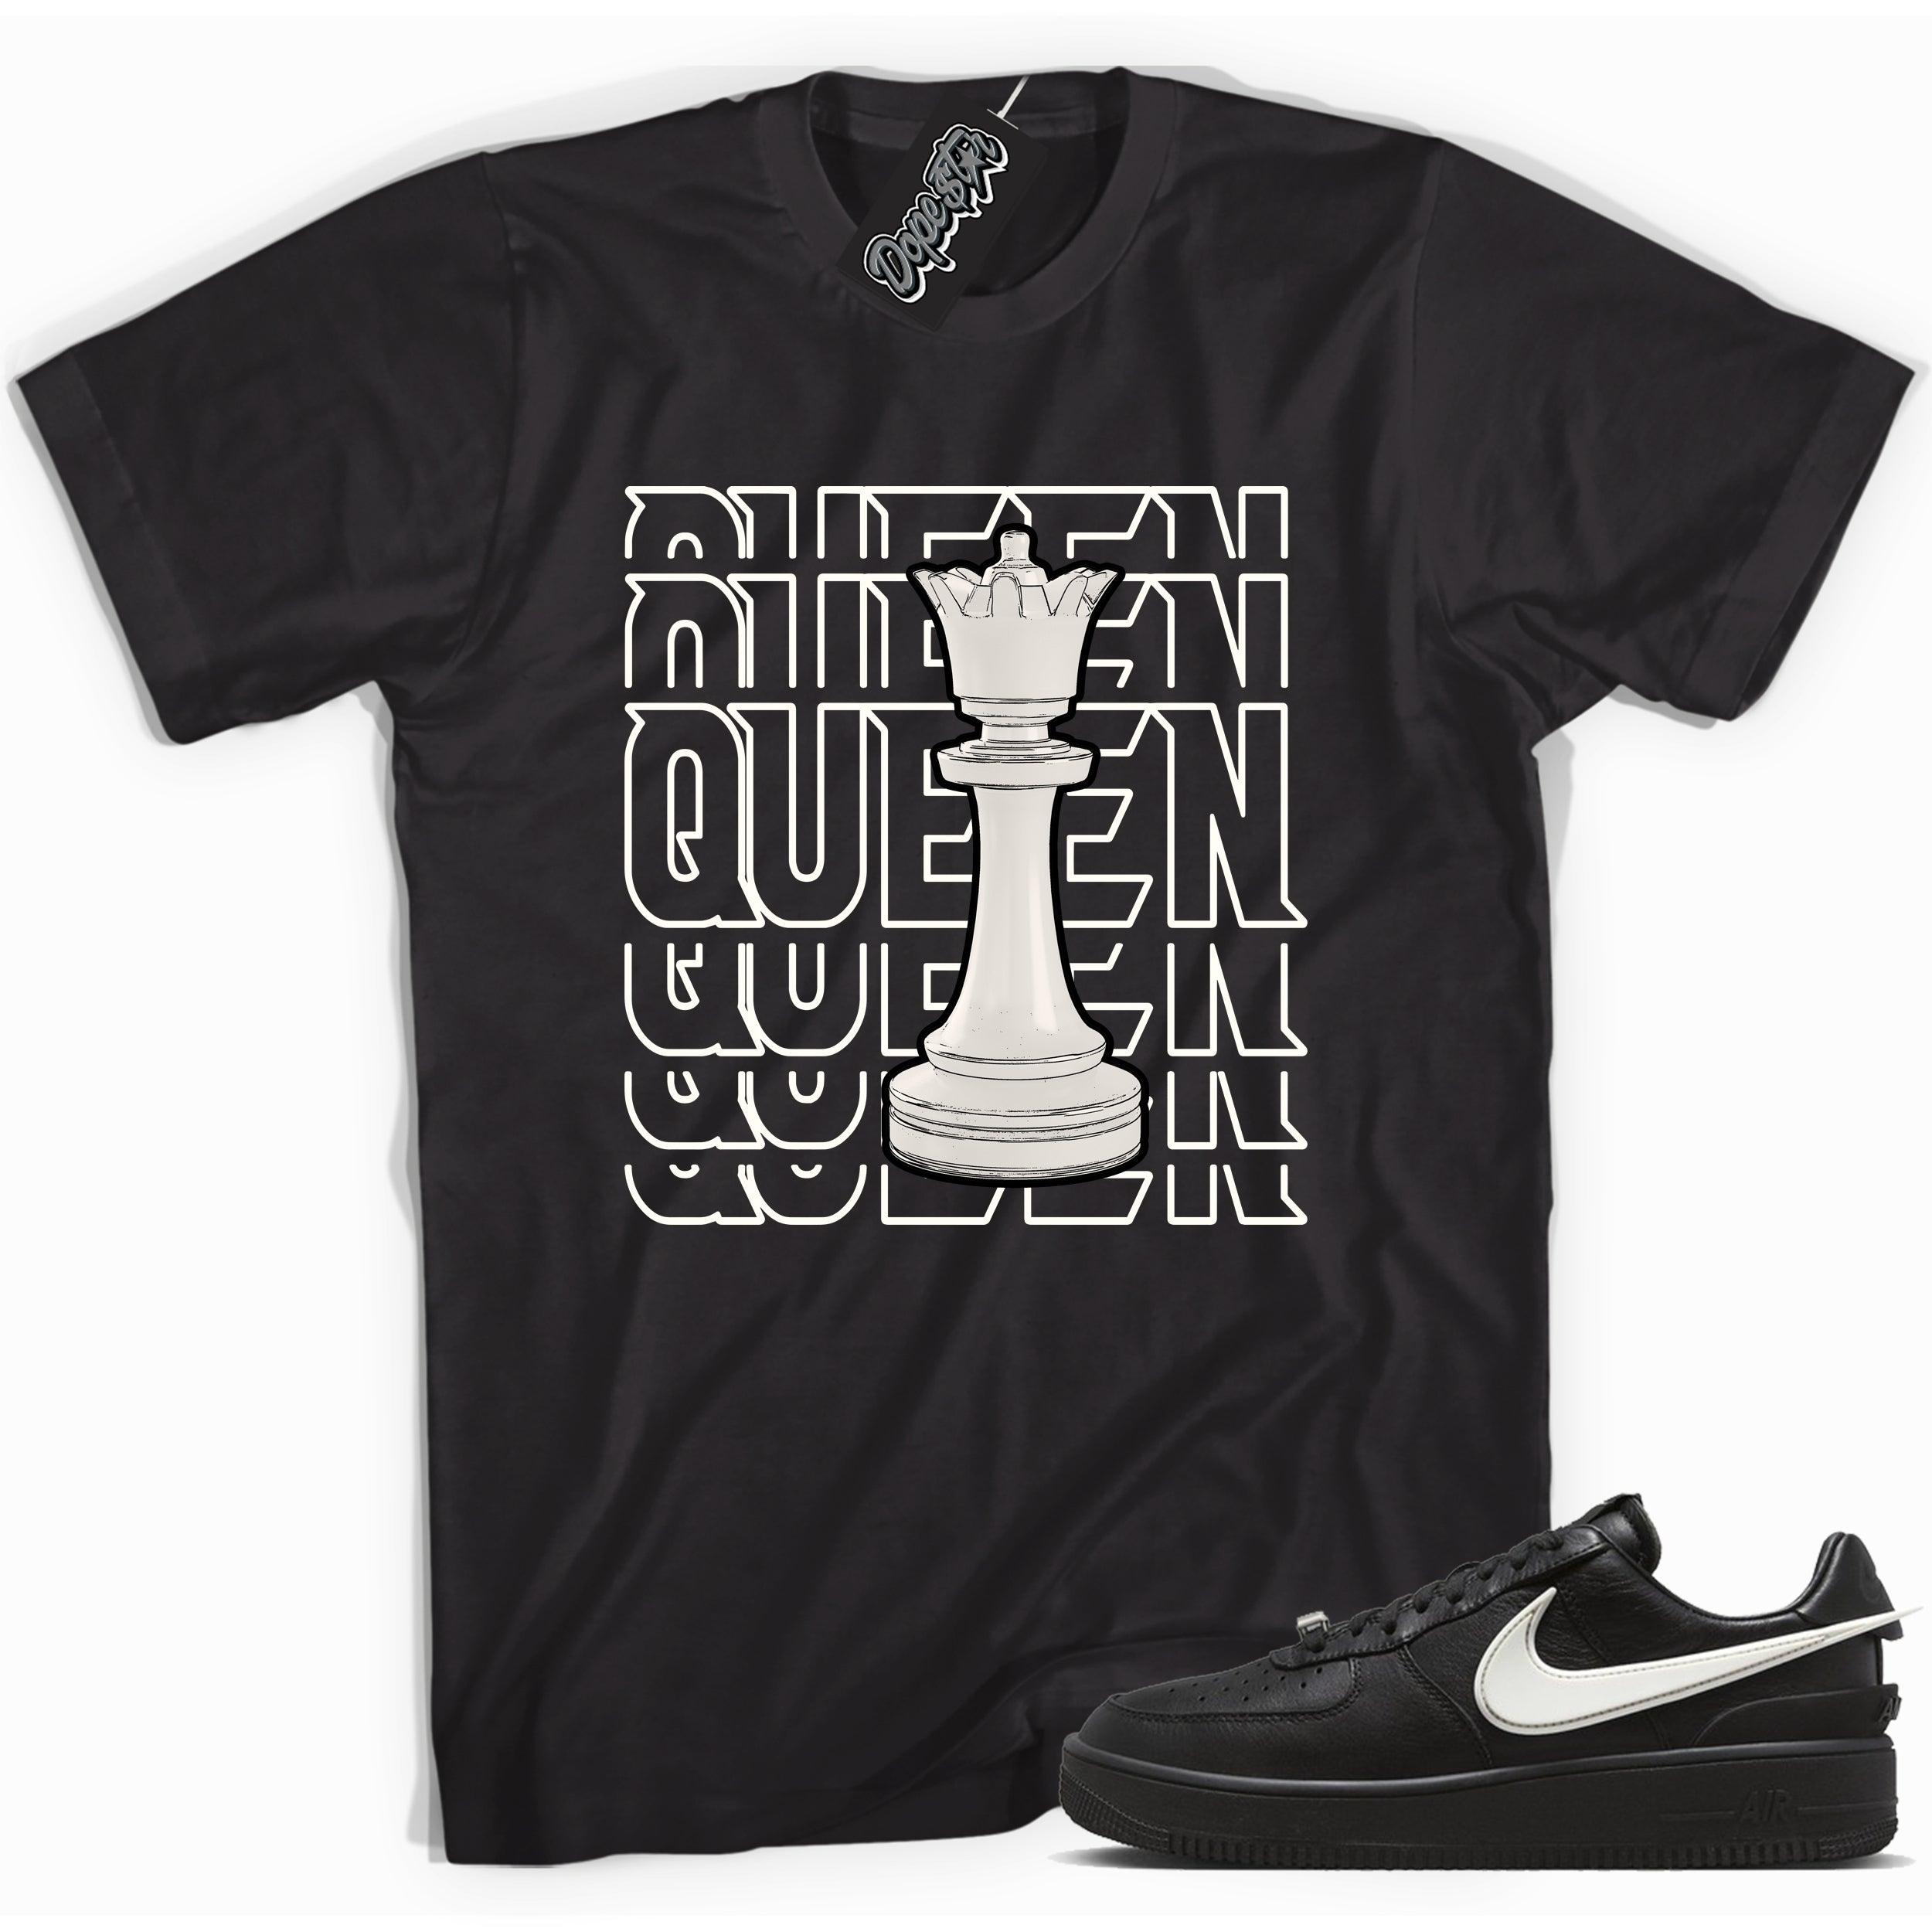 Cool black graphic tee with 'queen piece' print, that perfectly matches Nike Air Force 1 Low SP Ambush Phantom sneakers.